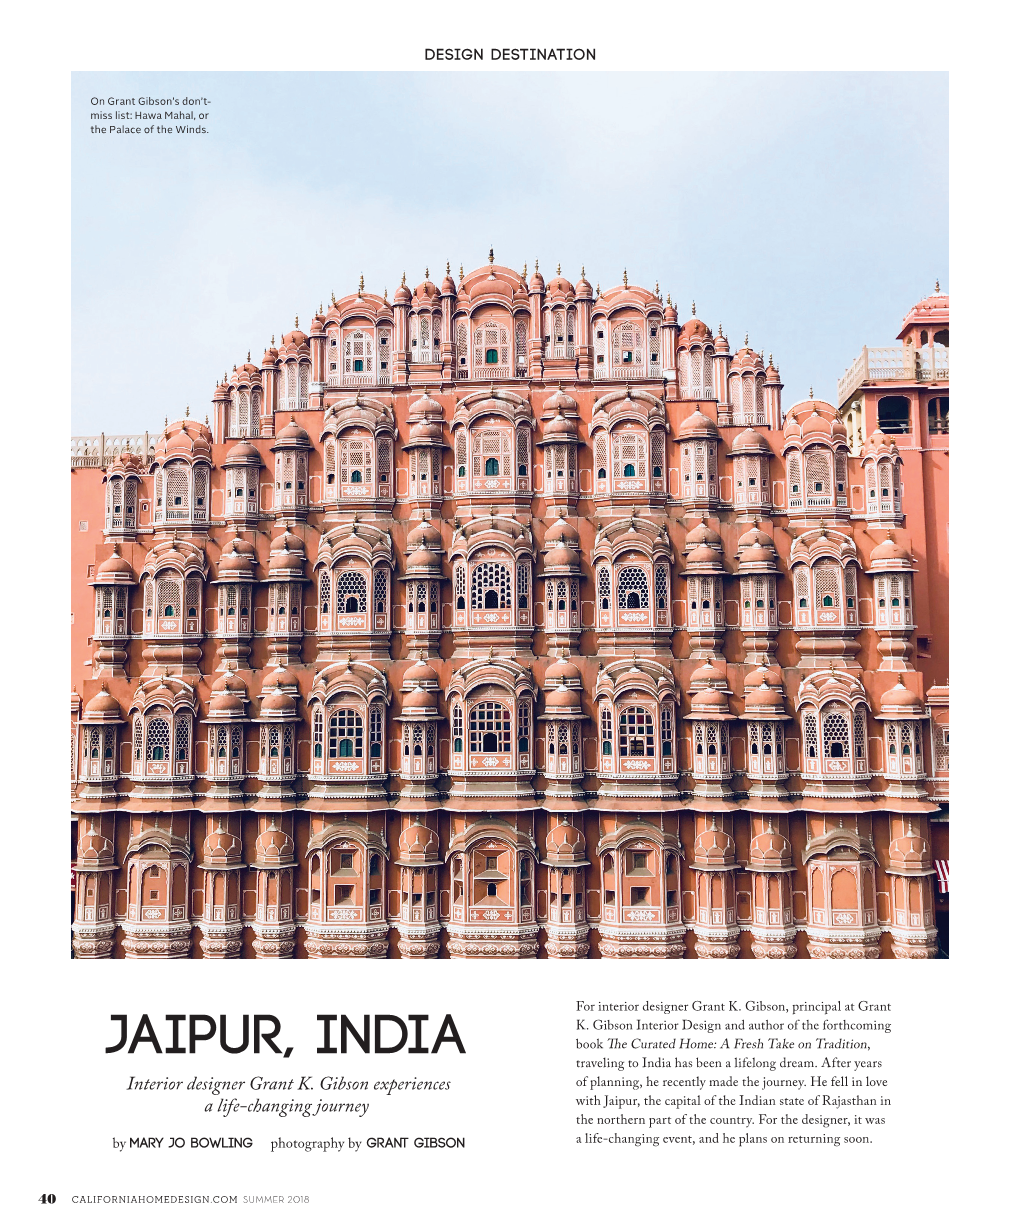 JAIPUR, INDIA Book the Curated Home: a Fresh Take on Tradition, Traveling to India Has Been a Lifelong Dream